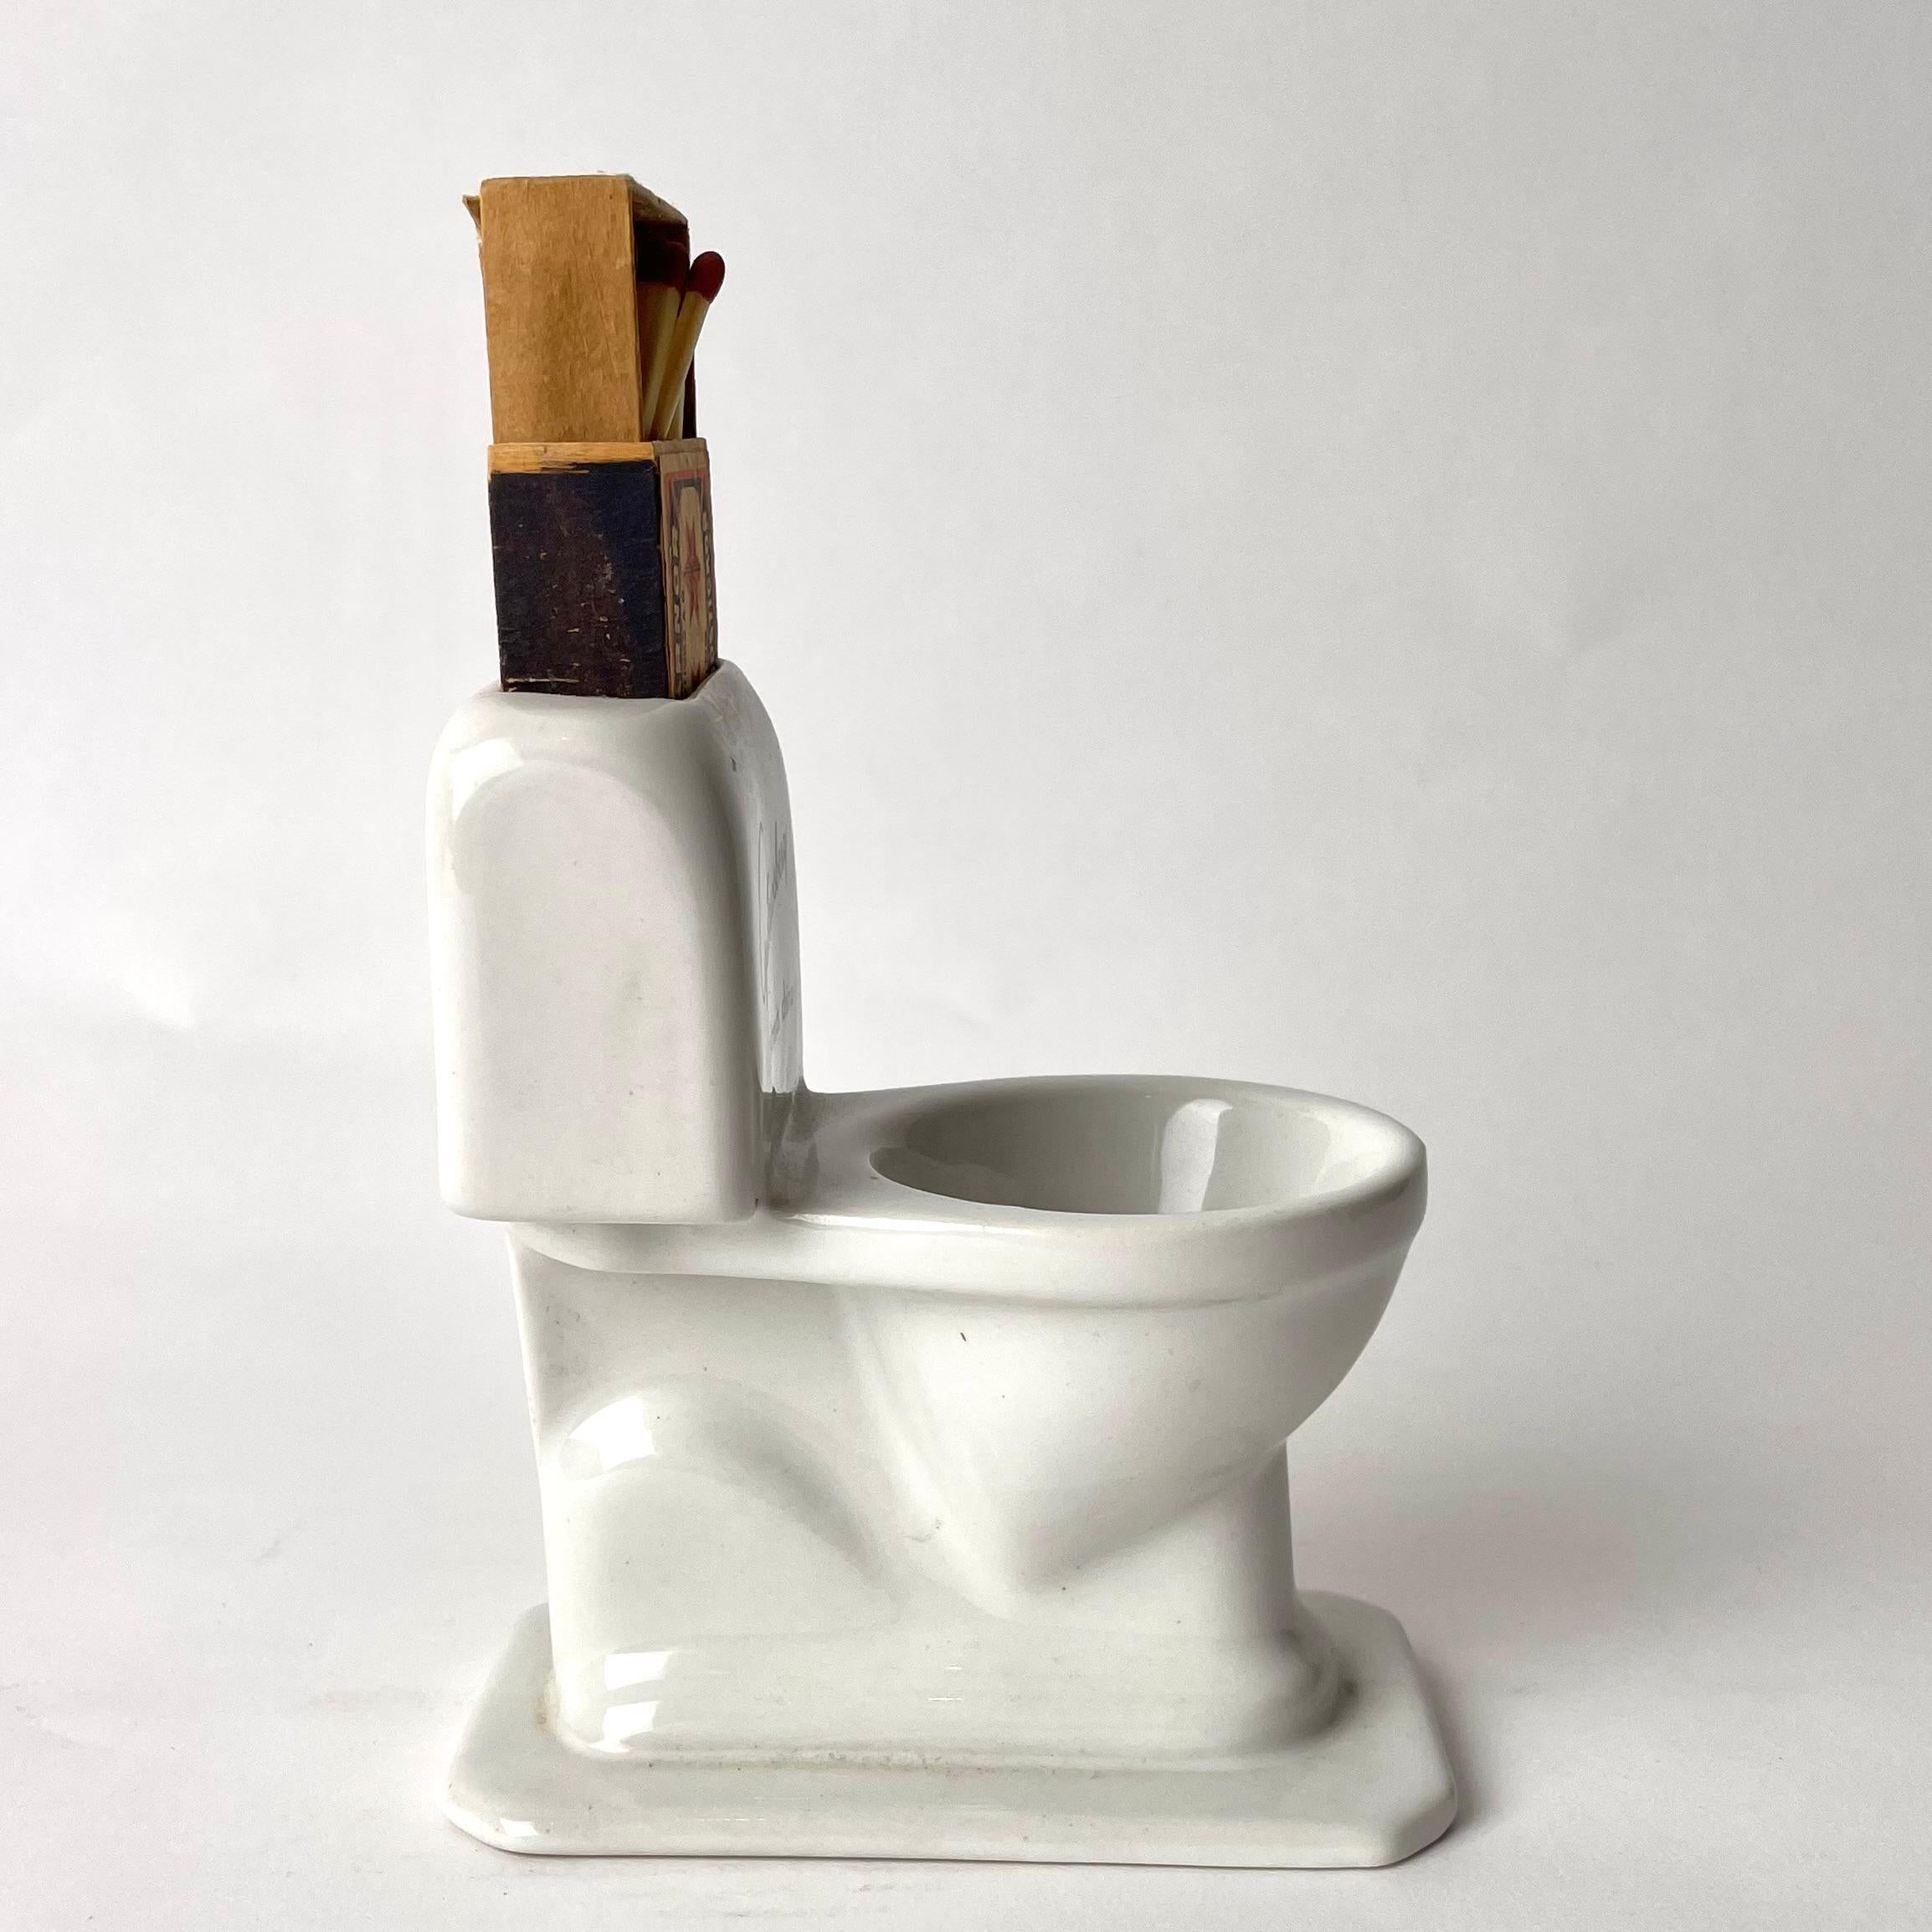 Swedish Charming Match Holder in the form of a toilet seat from mid-20th Century